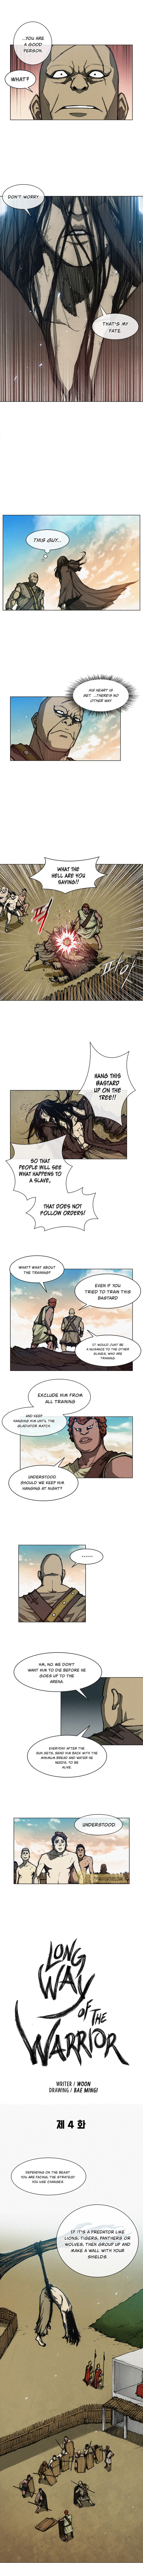 The Long Way Of The Warrior - Chapter 4 Page 3